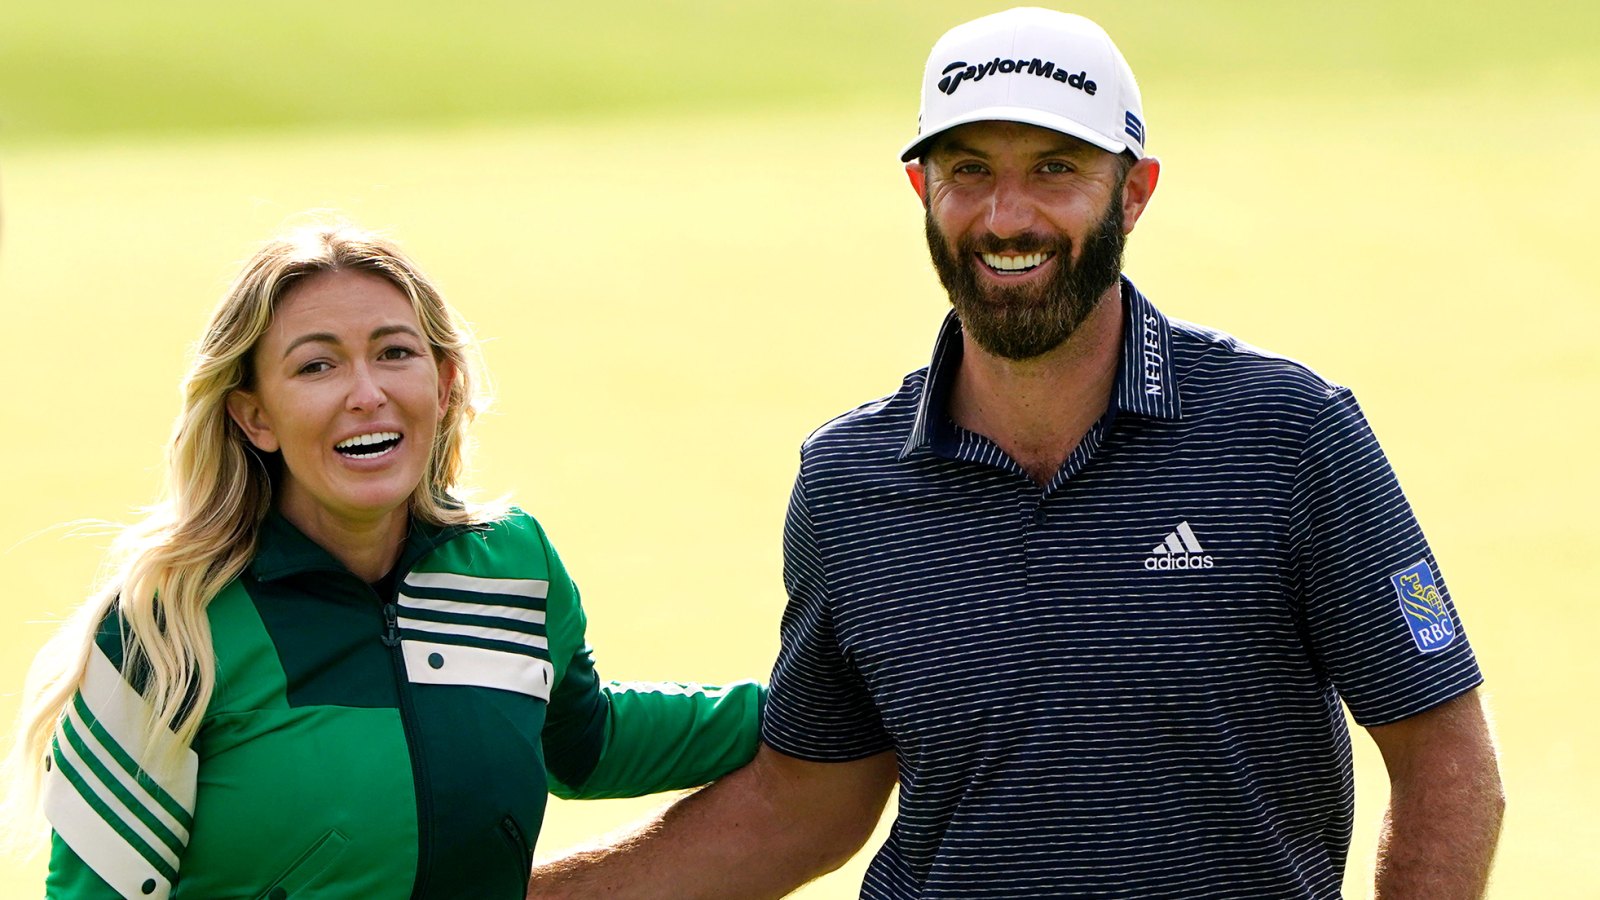 Wayne Gretzky's Daughter Paulina Gretzky Marries Golfer Dustin Johnson After 9-Year Engagement